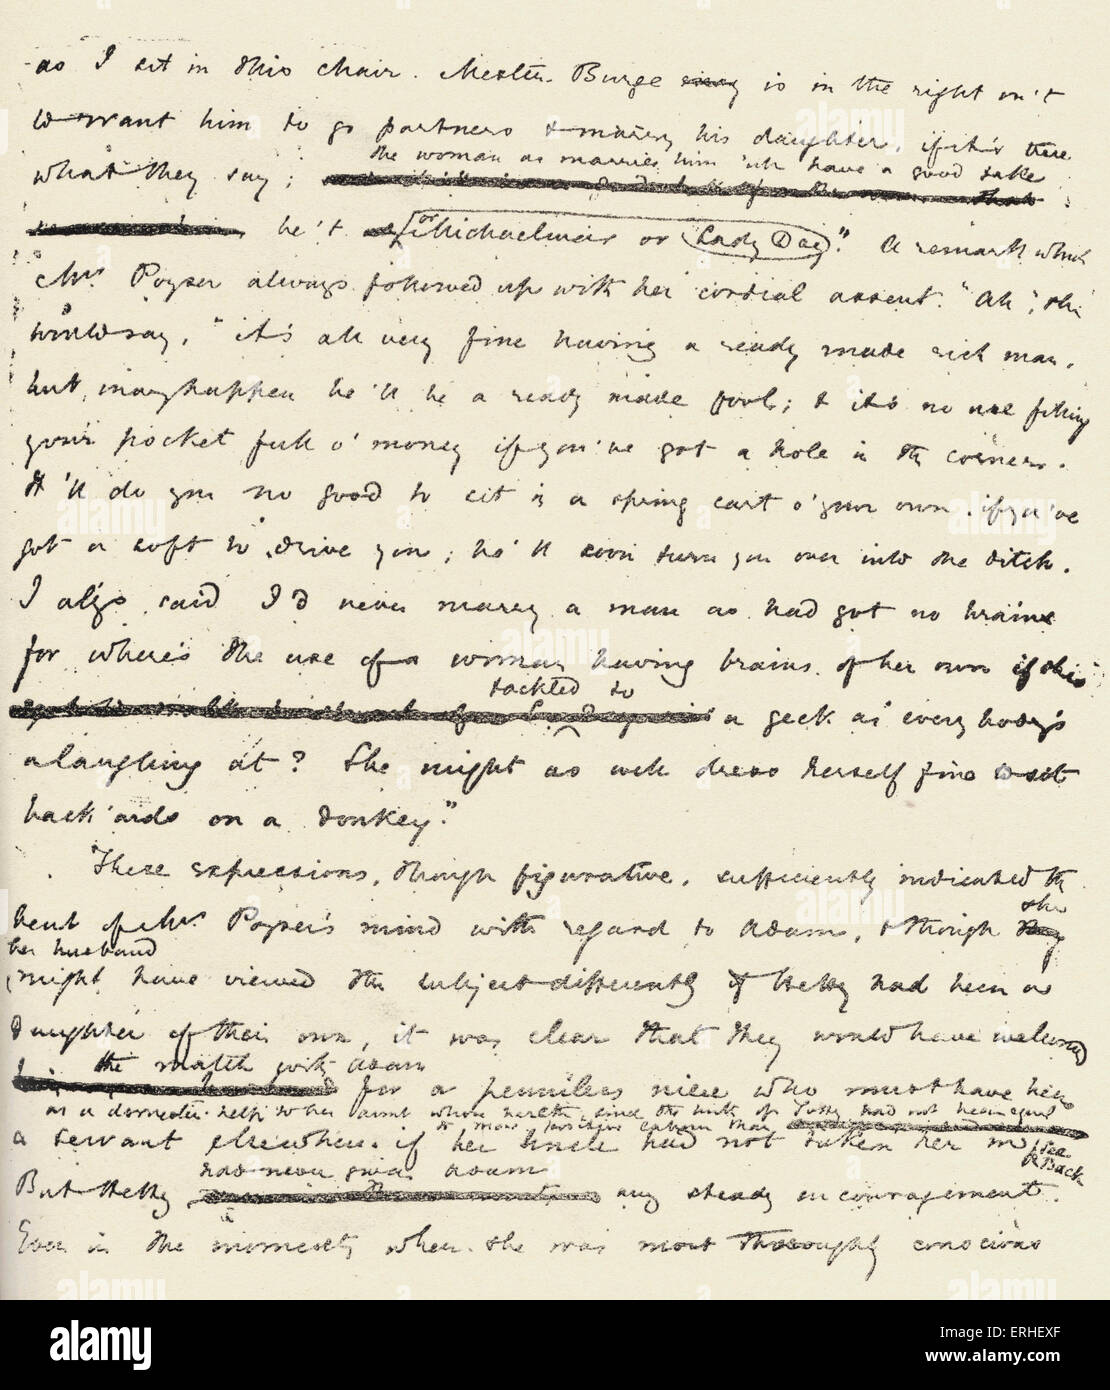 George Eliot - page from the manuscript of ' Adam Bede ' by the English writer ( pseudonym of Mary Ann / Marian Evans.) Stock Photo